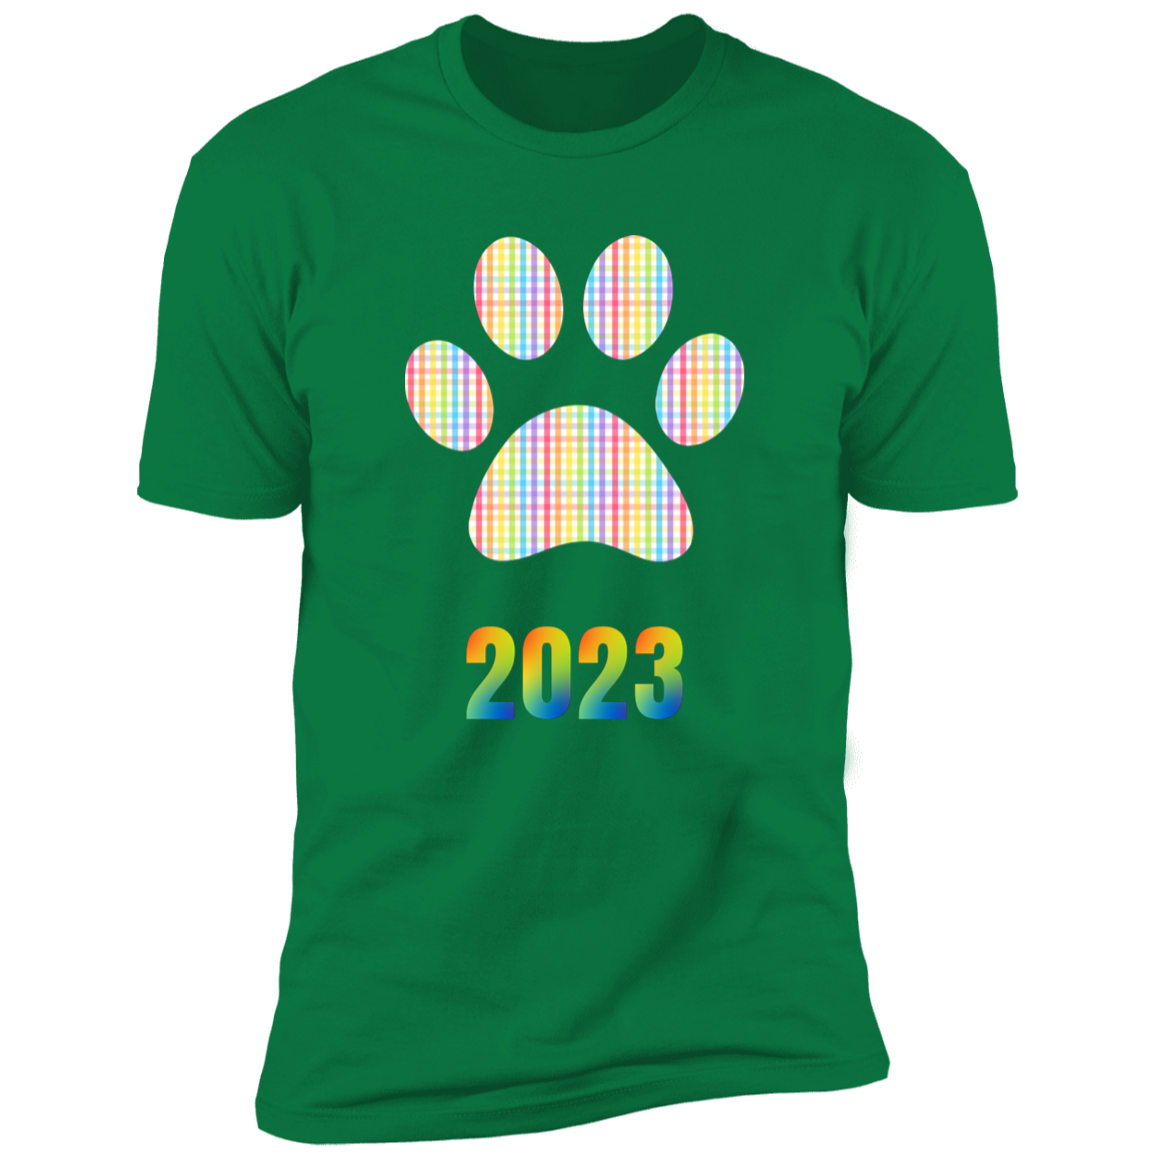 Pride Paw 2023 (Gingham) Pride T-shirt, Paw Pride Dog Shirt for humans, in kelly green